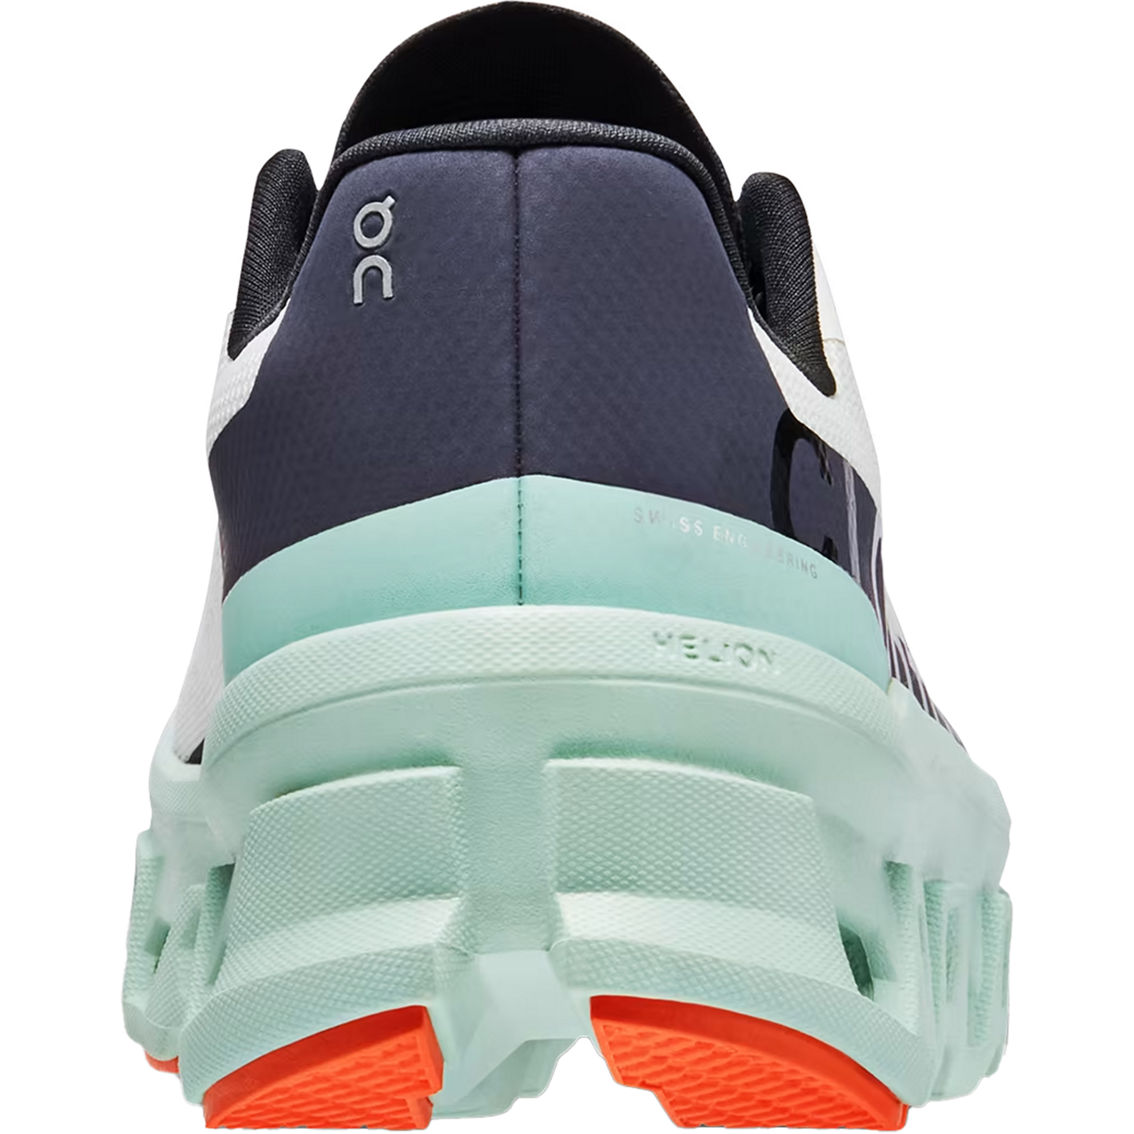 On Women's Cloudmonster Running Shoes - Image 6 of 6